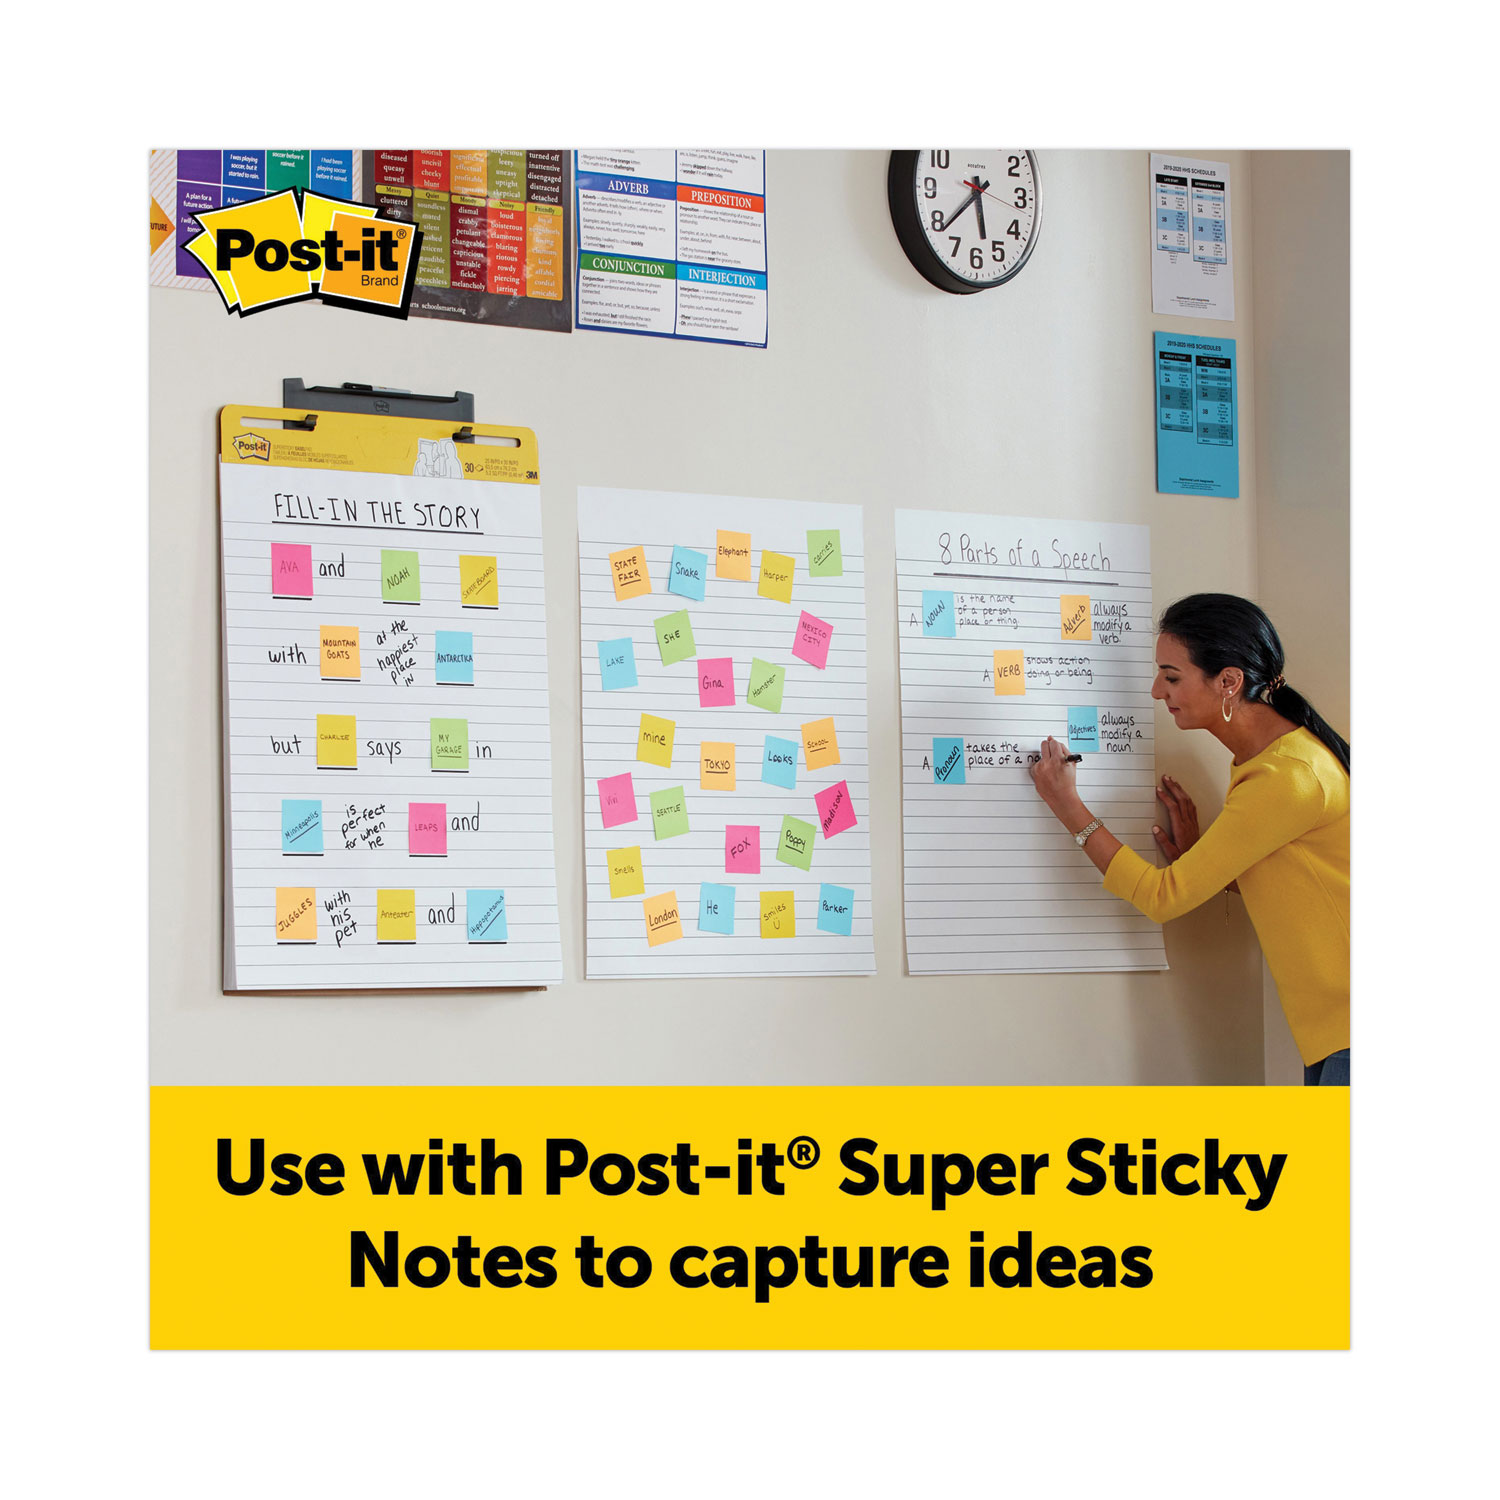 Post-it Super Sticky Easel Pad, 25 x 30, 30 Shts/Pad, White, 6 Pads 